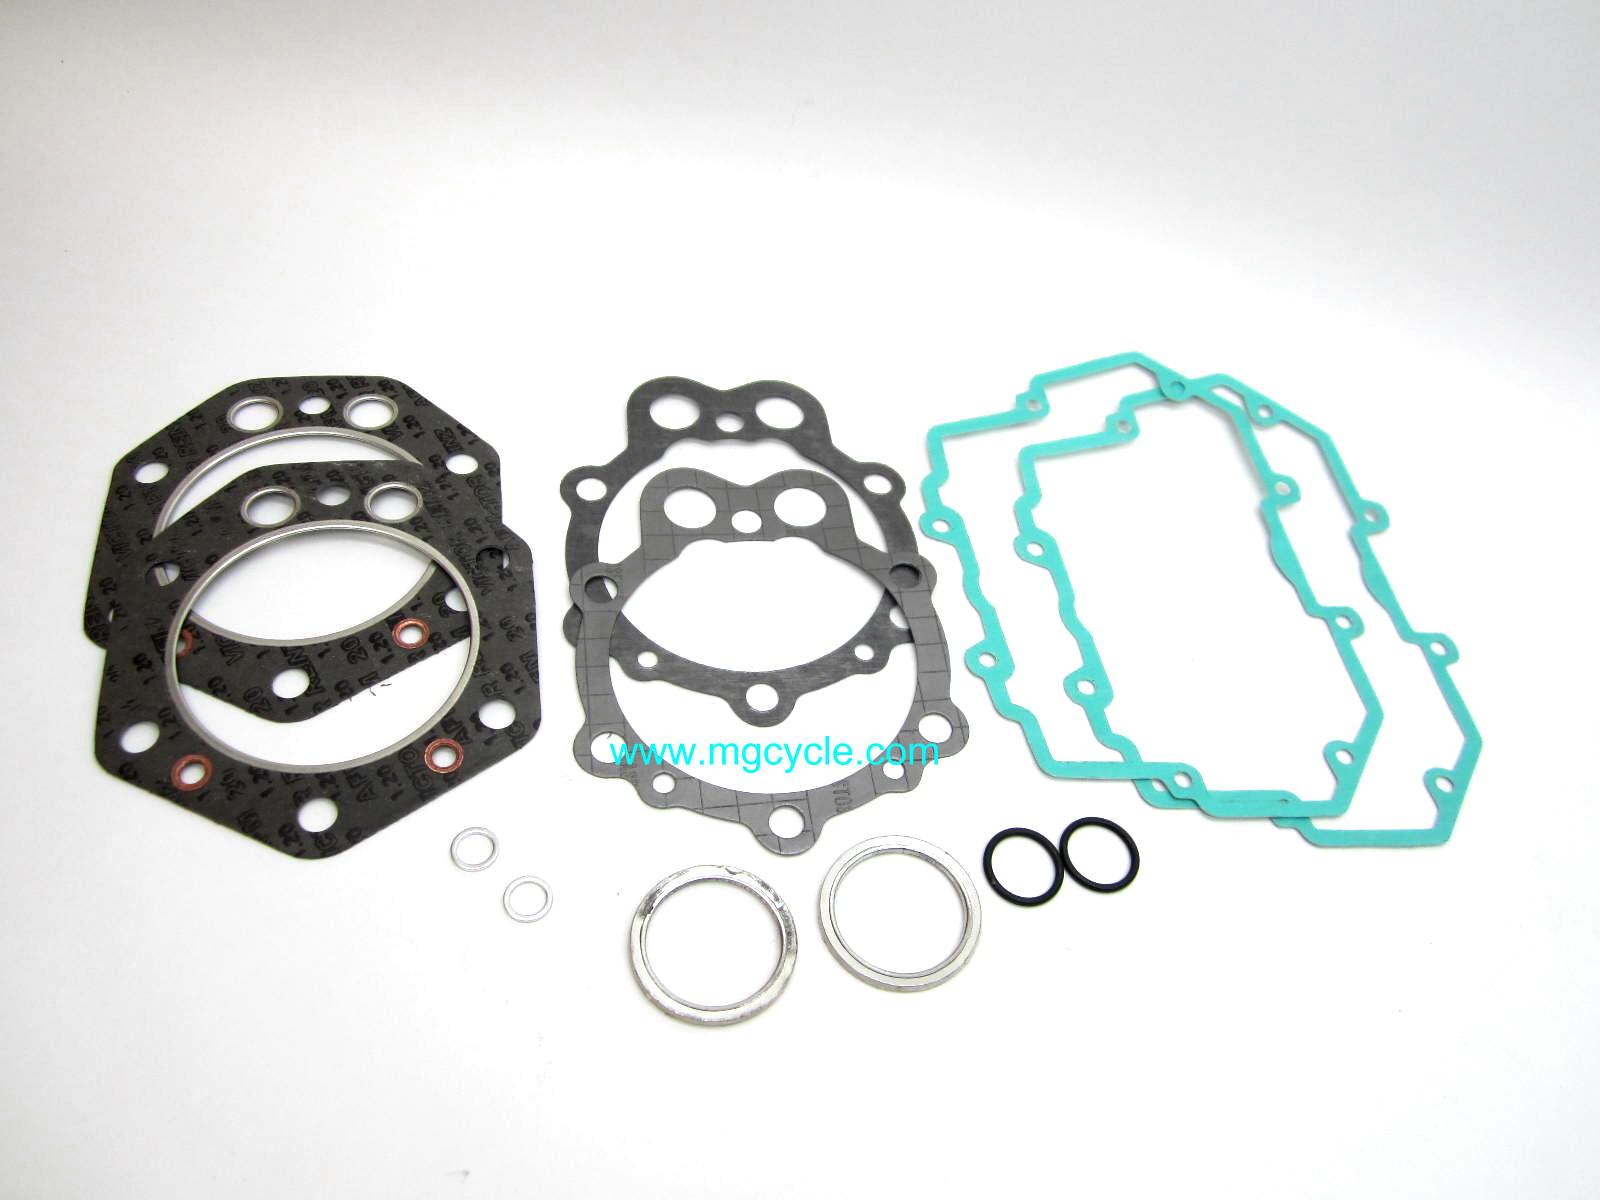 Top end engine gasket set for 1000cc 88mm square heads 1984-1993